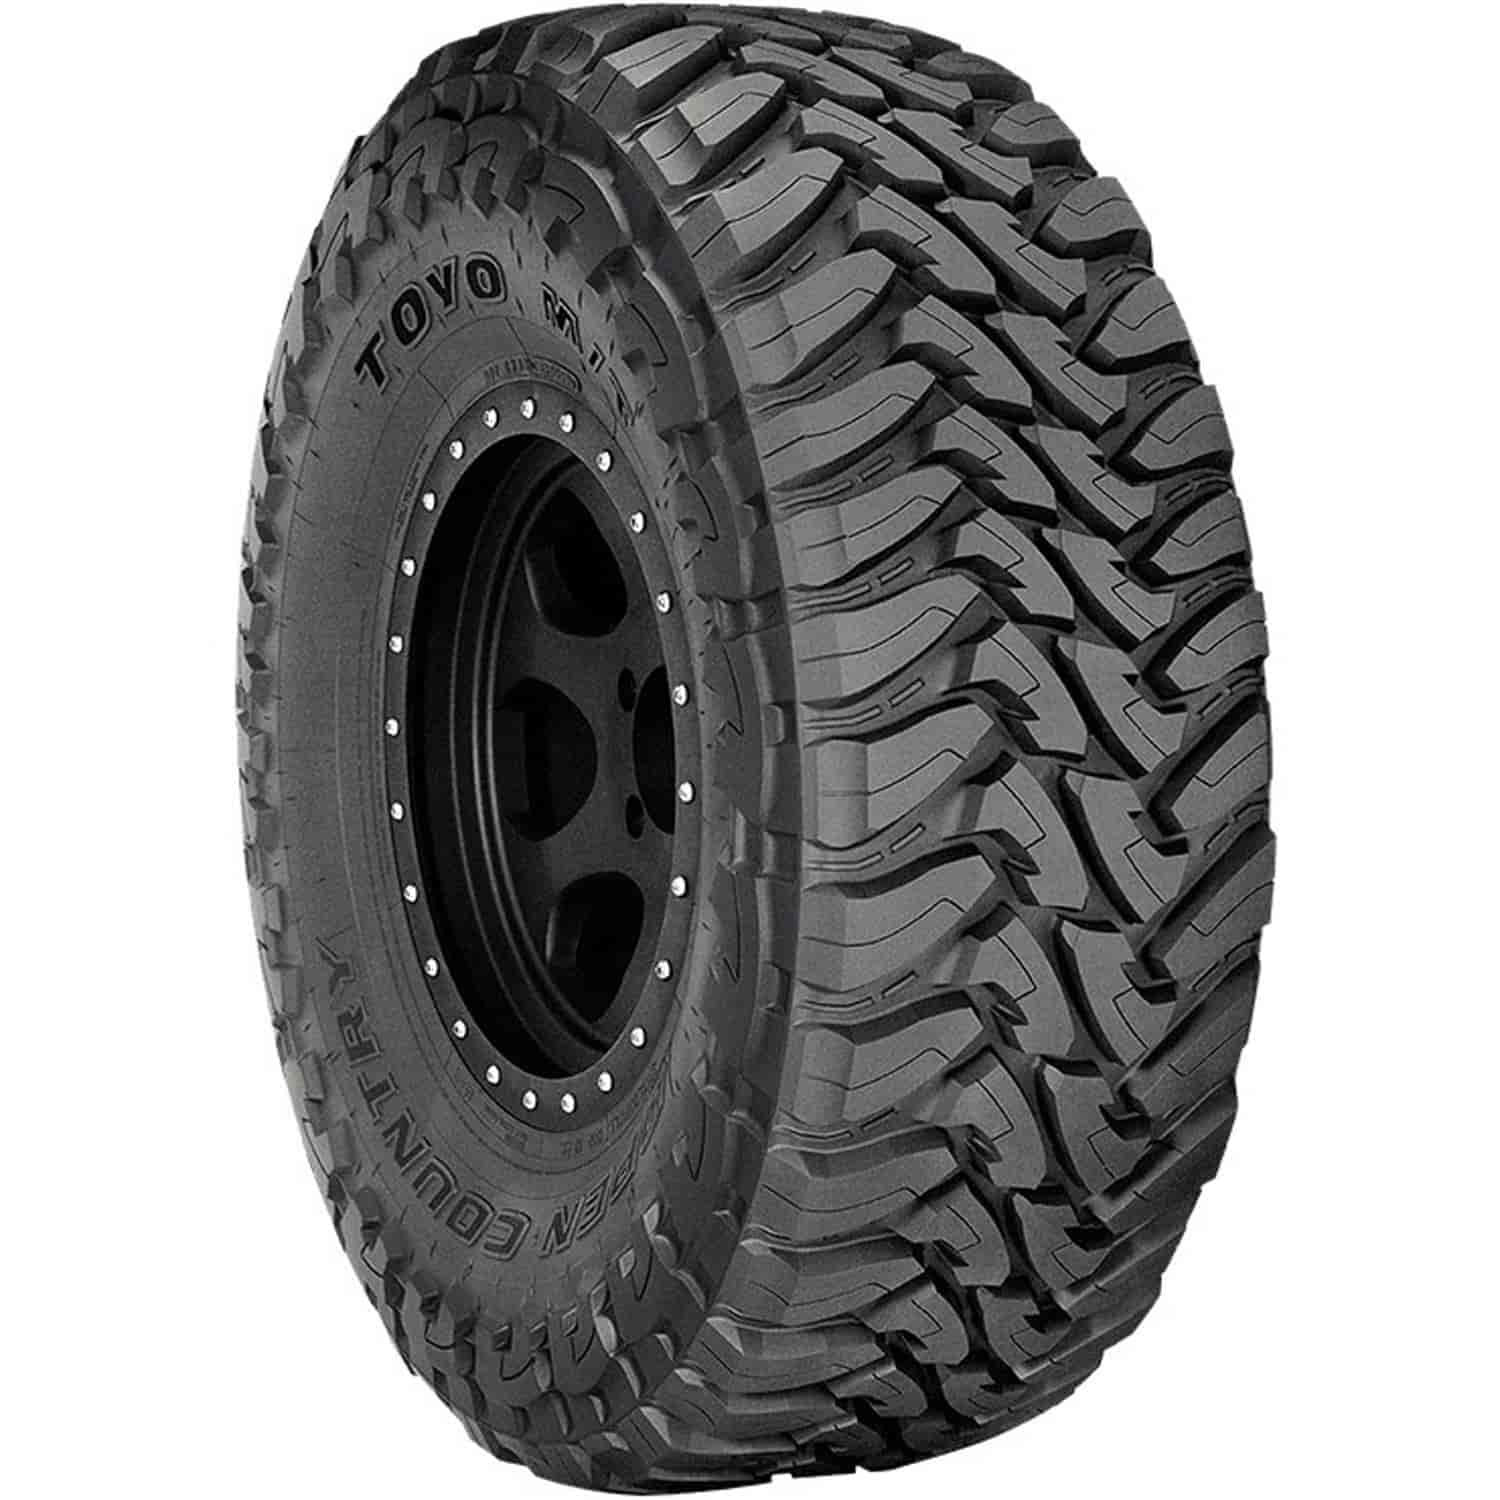 Open Country M/T LT285/75R18 129P E/10 35X11.50R18